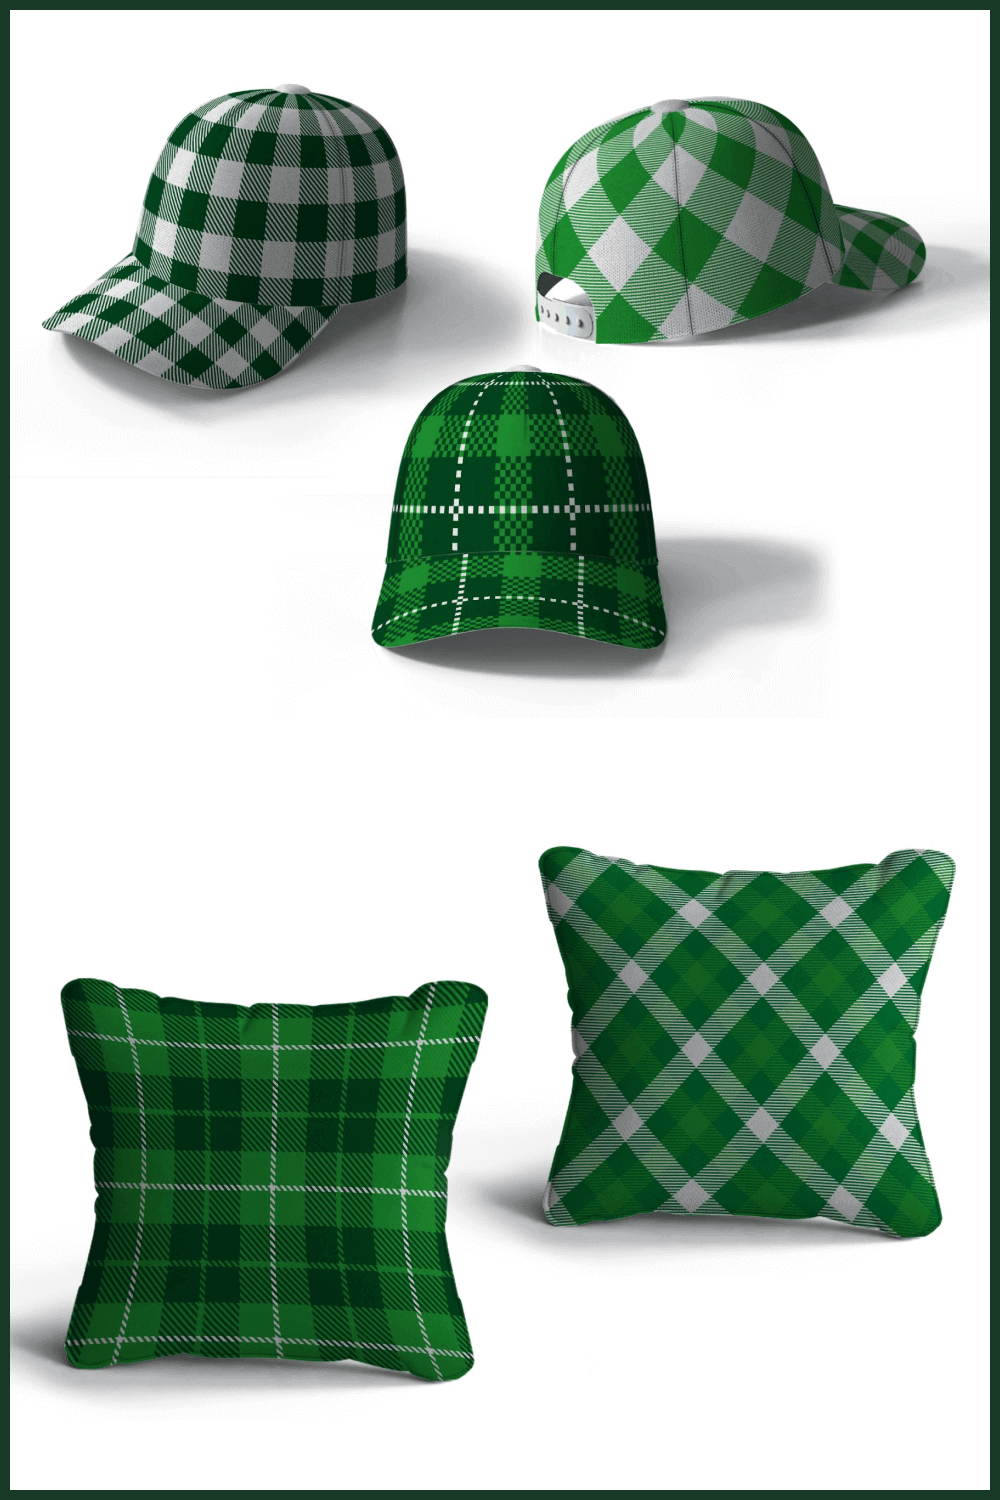 Checkered Caps and Pillows.